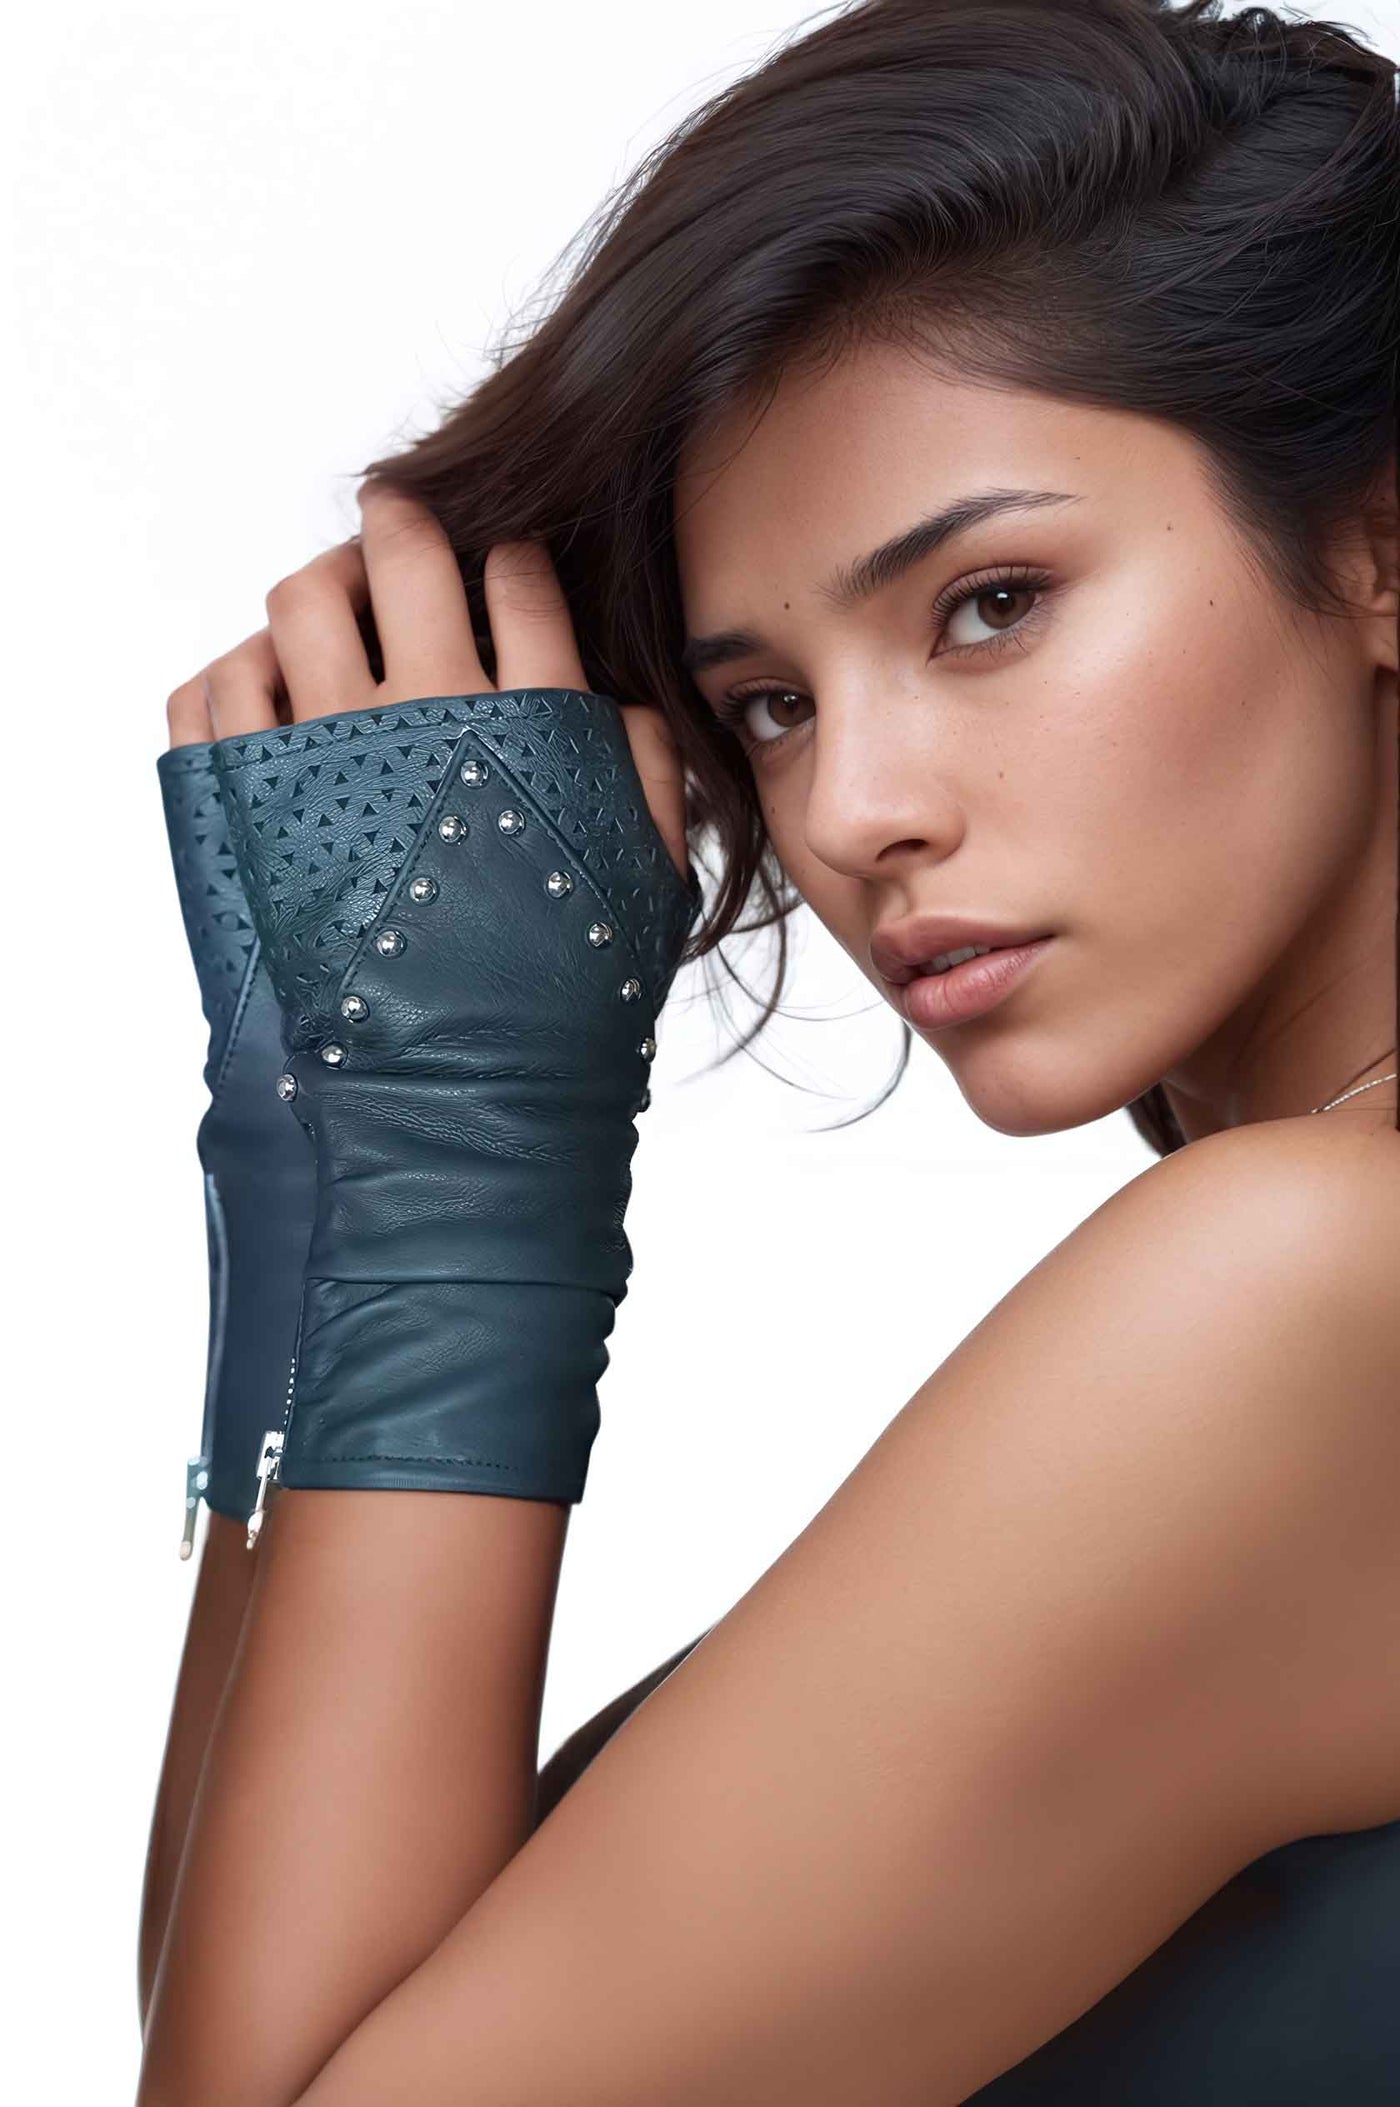 Love Khaos black leather fingerless gloves with studs